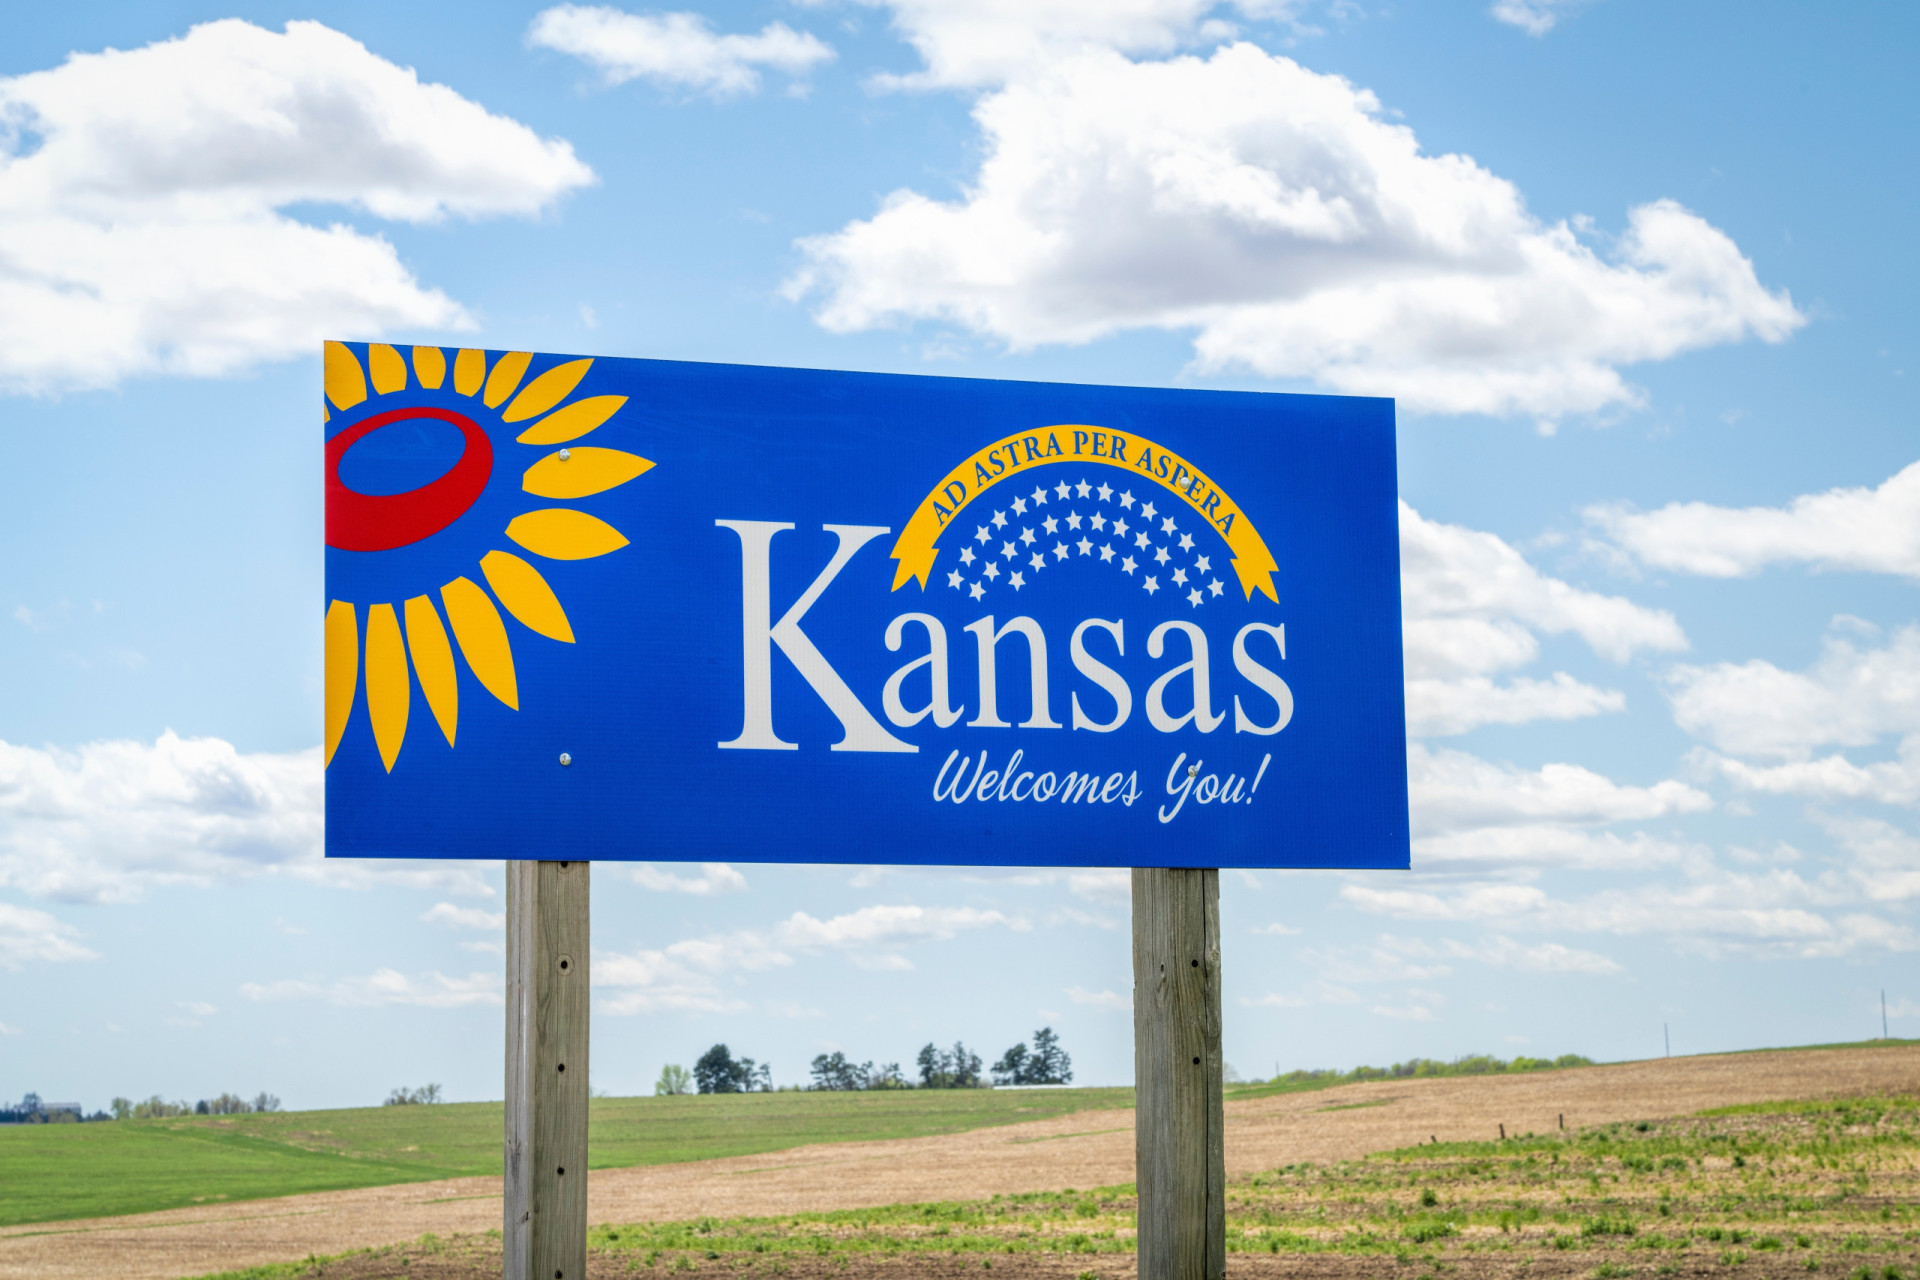 <p>Kansas' welcome sign features a sunflower, which is the official <a href="https://www.starsinsider.com/lifestyle/195531/keep-america-weird-strangest-facts-about-each-state" rel="noopener">state</a> flower.</p><p>You may also like:<a href="https://www.starsinsider.com/n/306032?utm_source=msn.com&utm_medium=display&utm_campaign=referral_description&utm_content=572689en-en"> The world's most incredible historic gold artifacts</a></p>